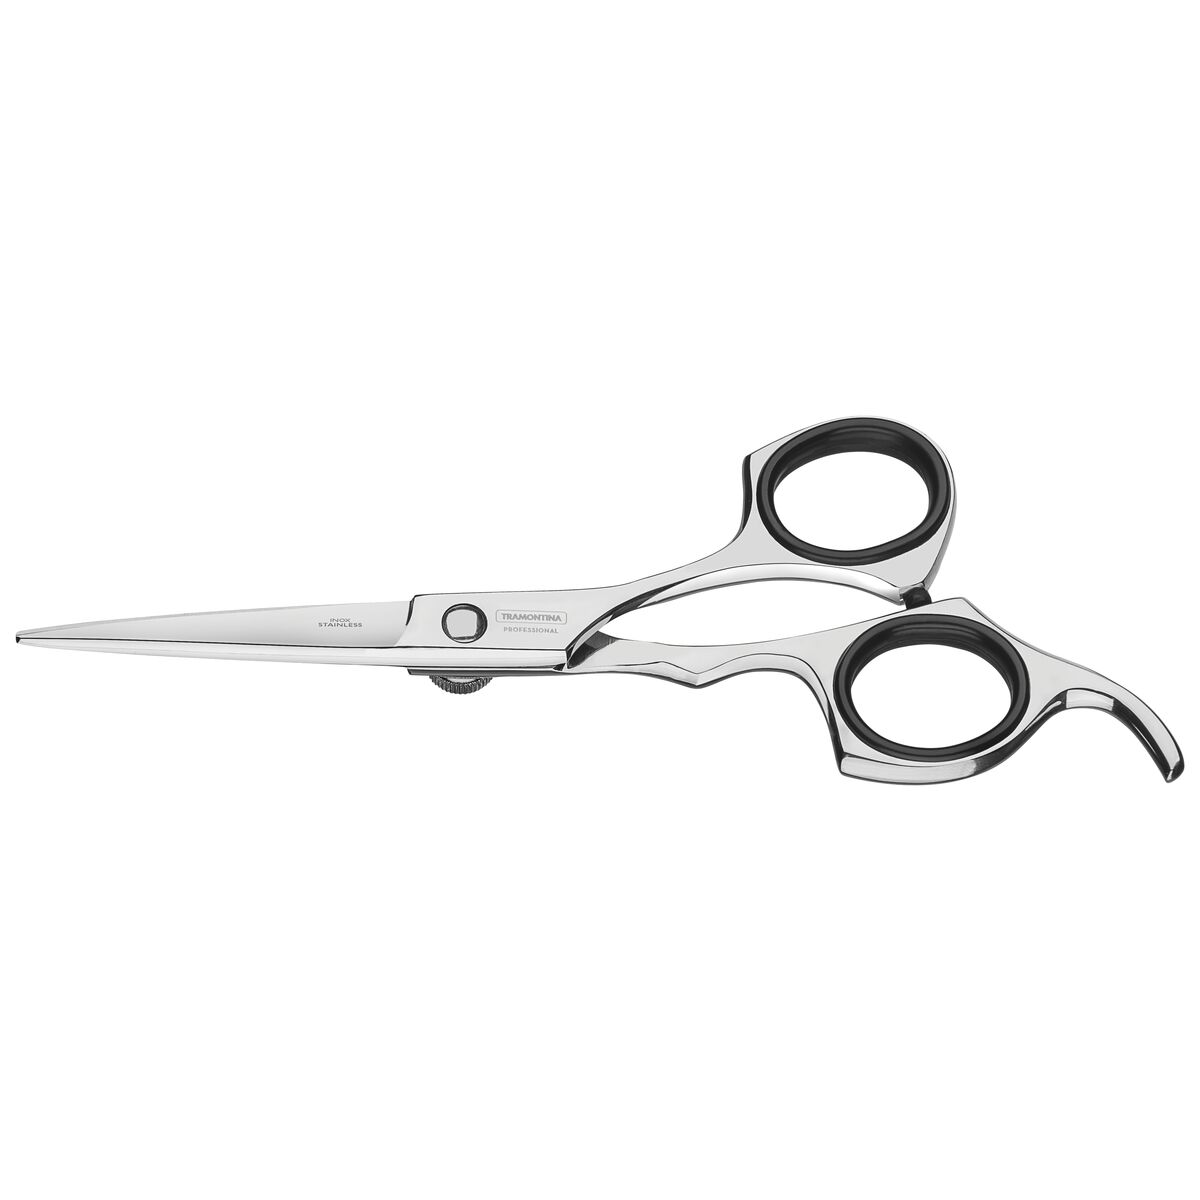 Tramontina 5.5" stainless steel hair shears with razor edge and fixed finger support